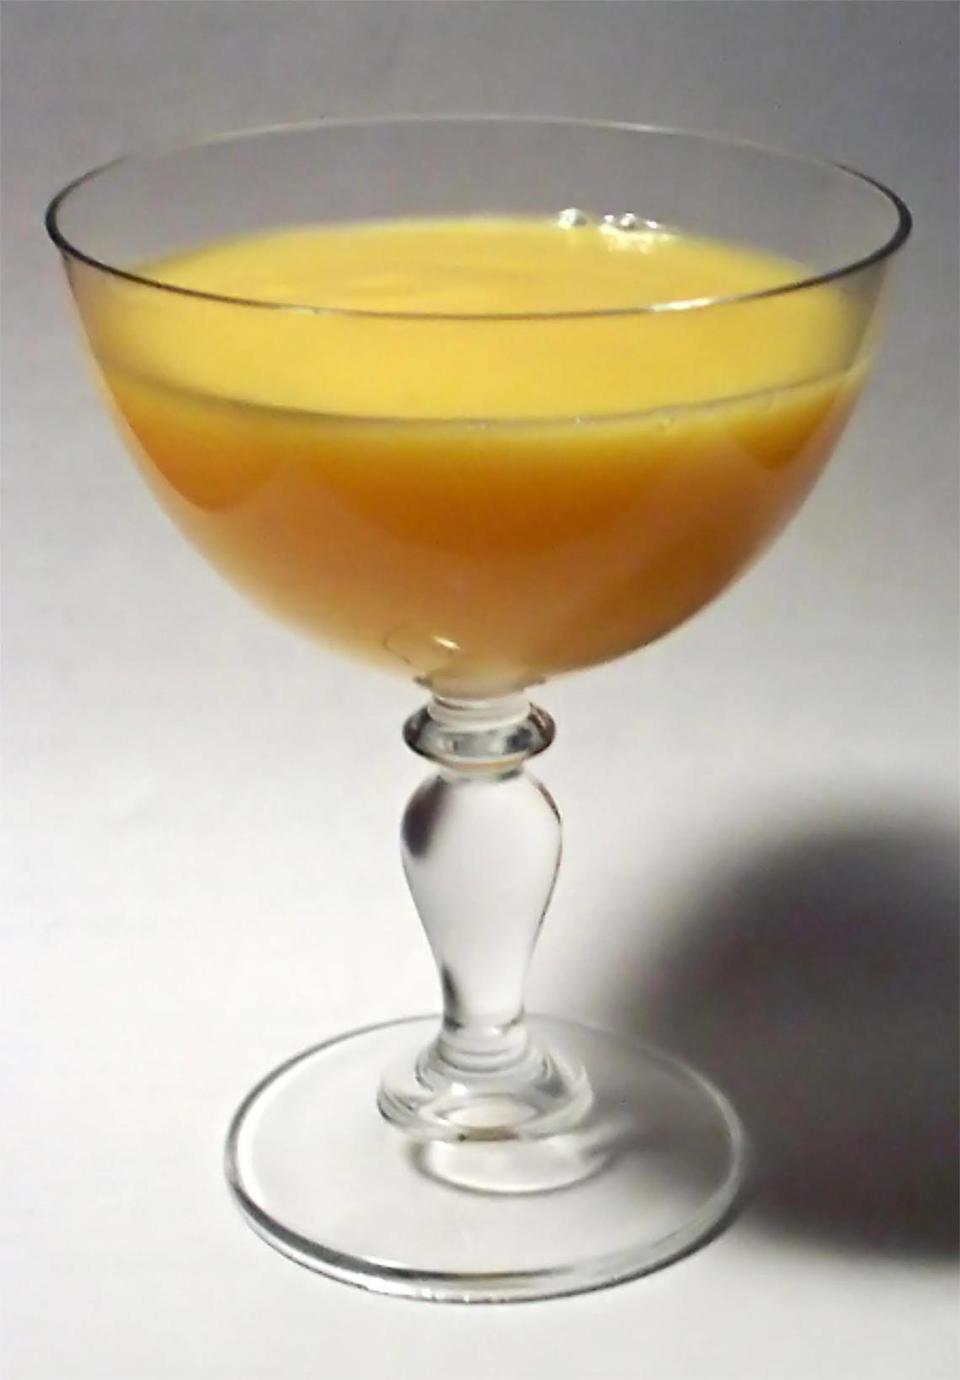 A rompope, a Mexican holiday egg-based drink.